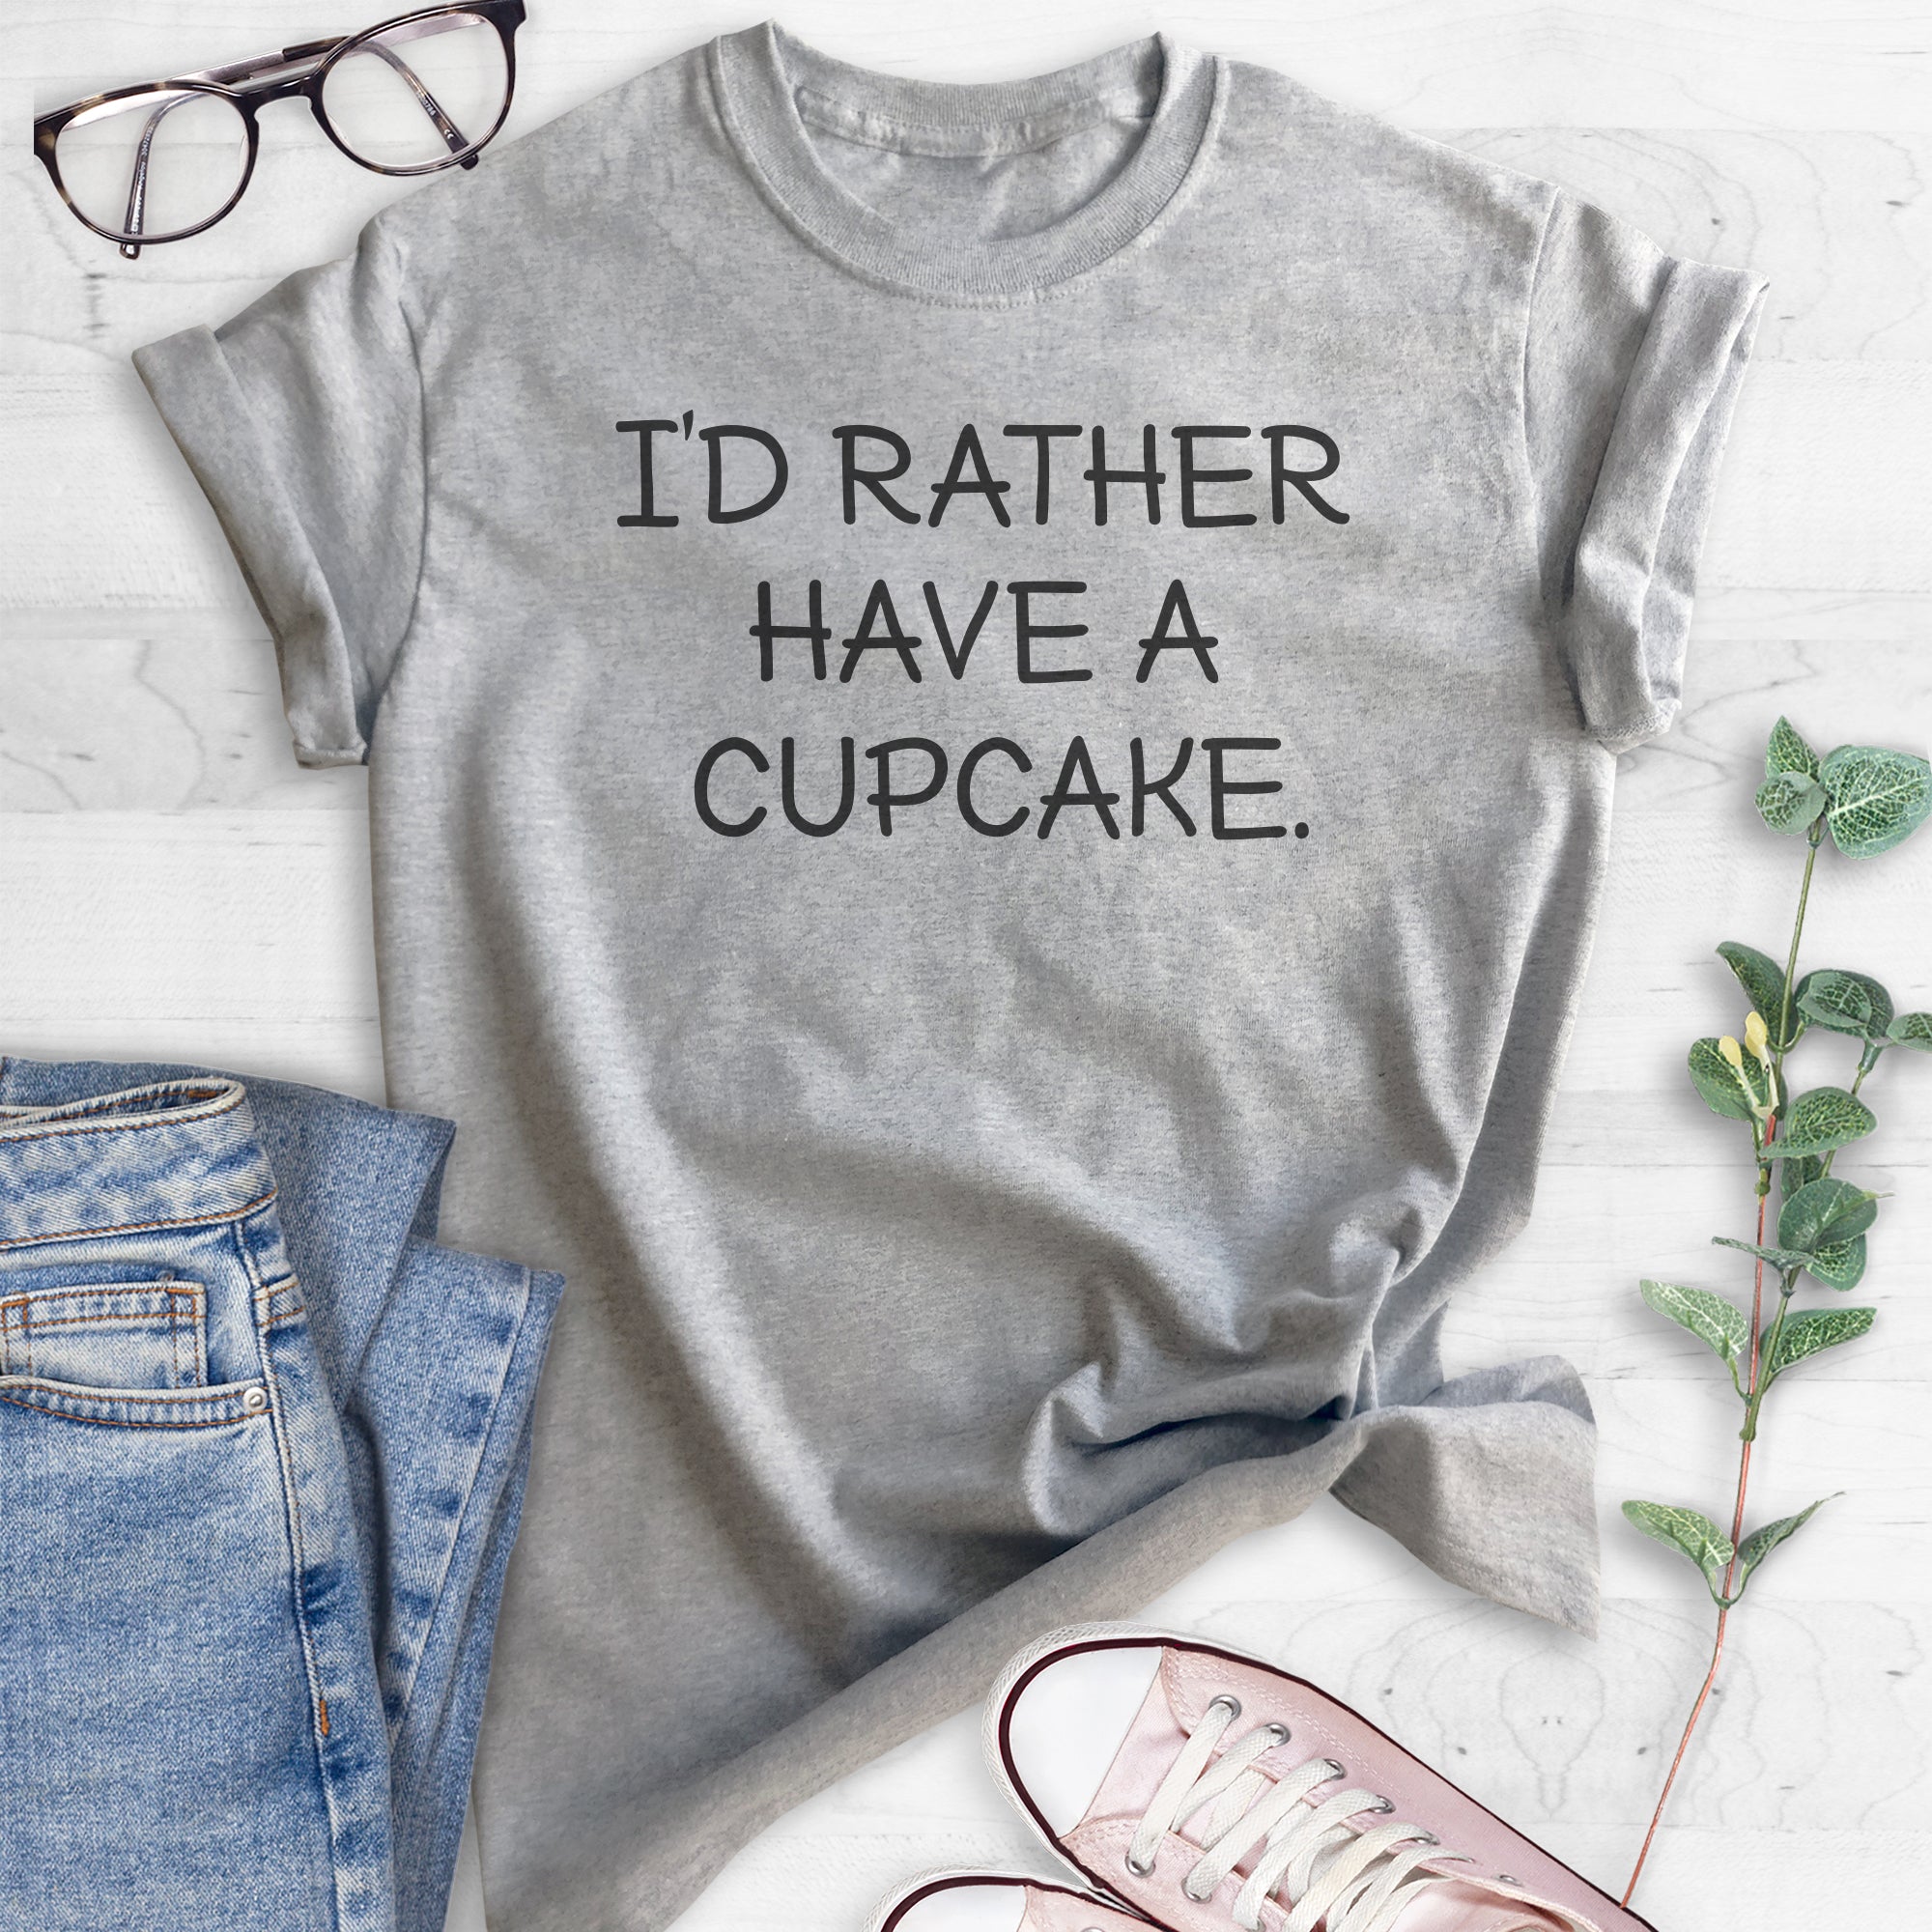 I'd Rather Have A Cupcake T-shirt, Unisex Women's Men's Shirt, Cupcake T-shirt, Heather Gray, X-Large - image 2 of 6